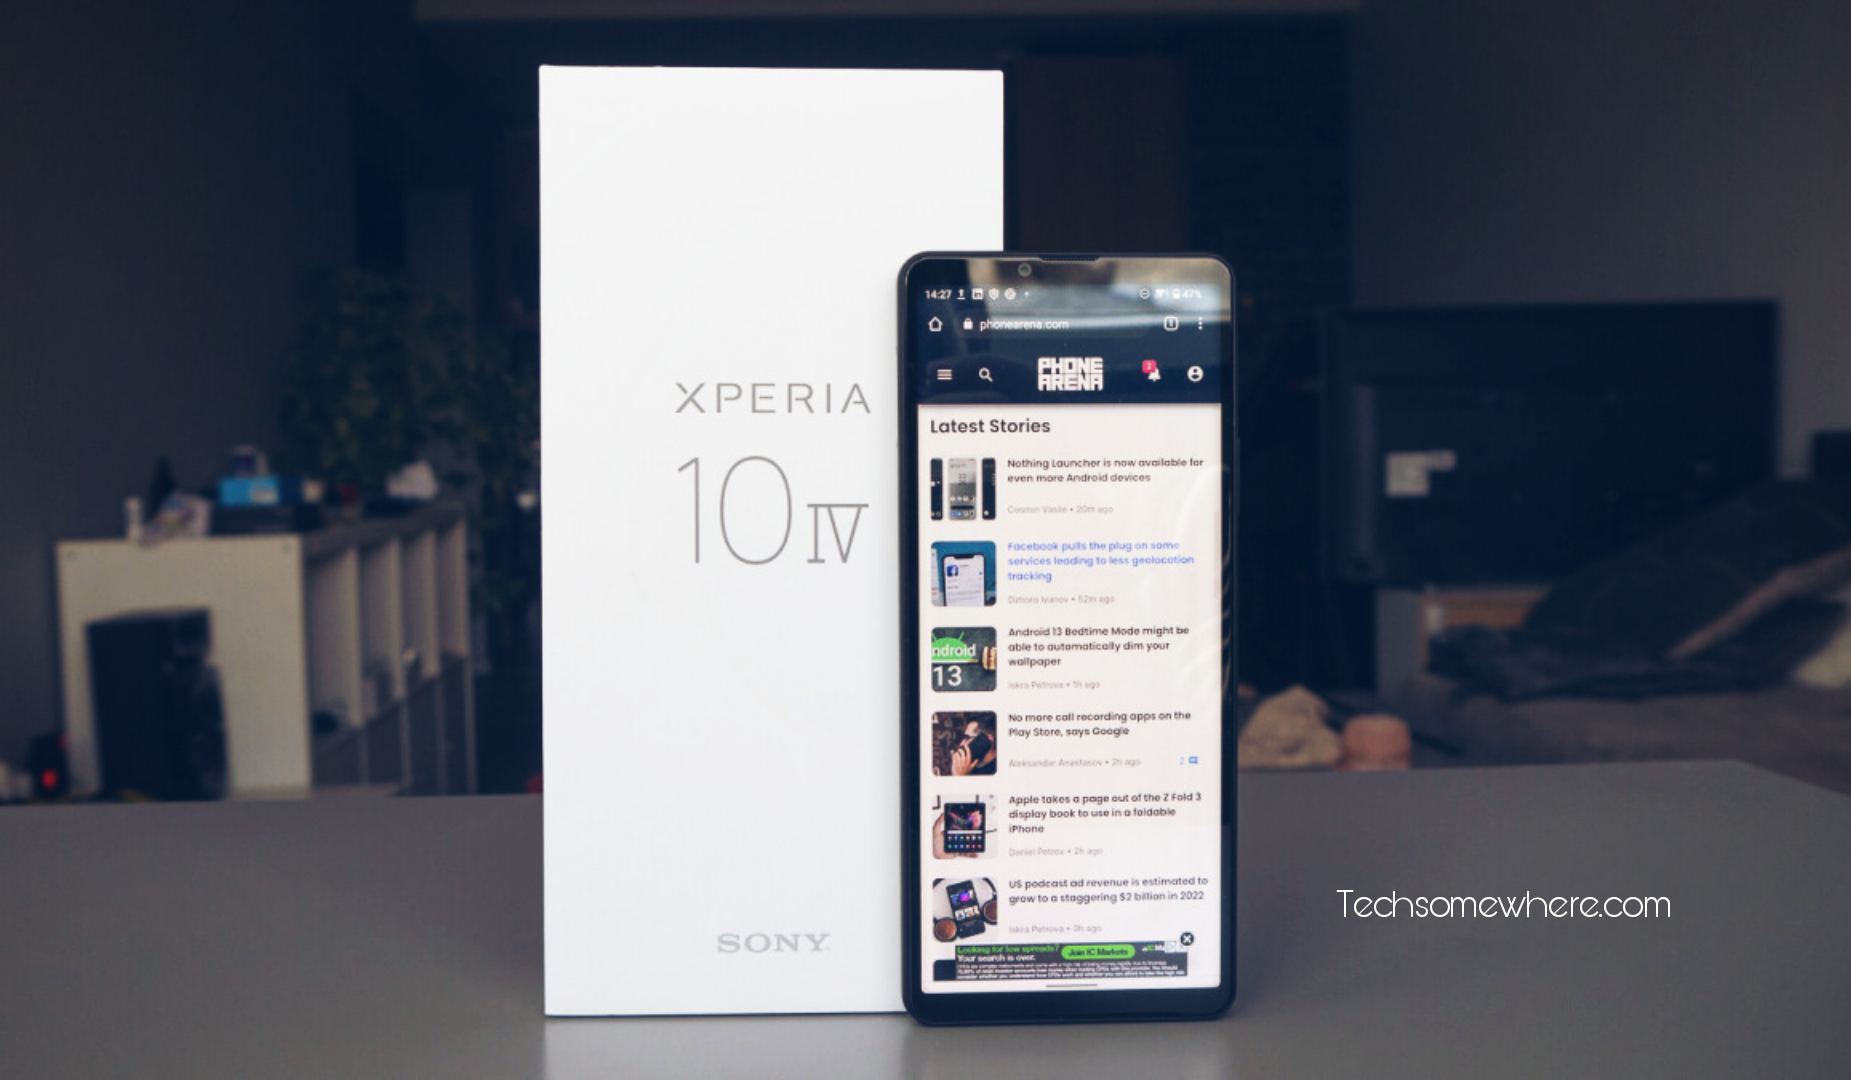 Sony Xperia 10 IV Price, Interesting Specification & Release Date!